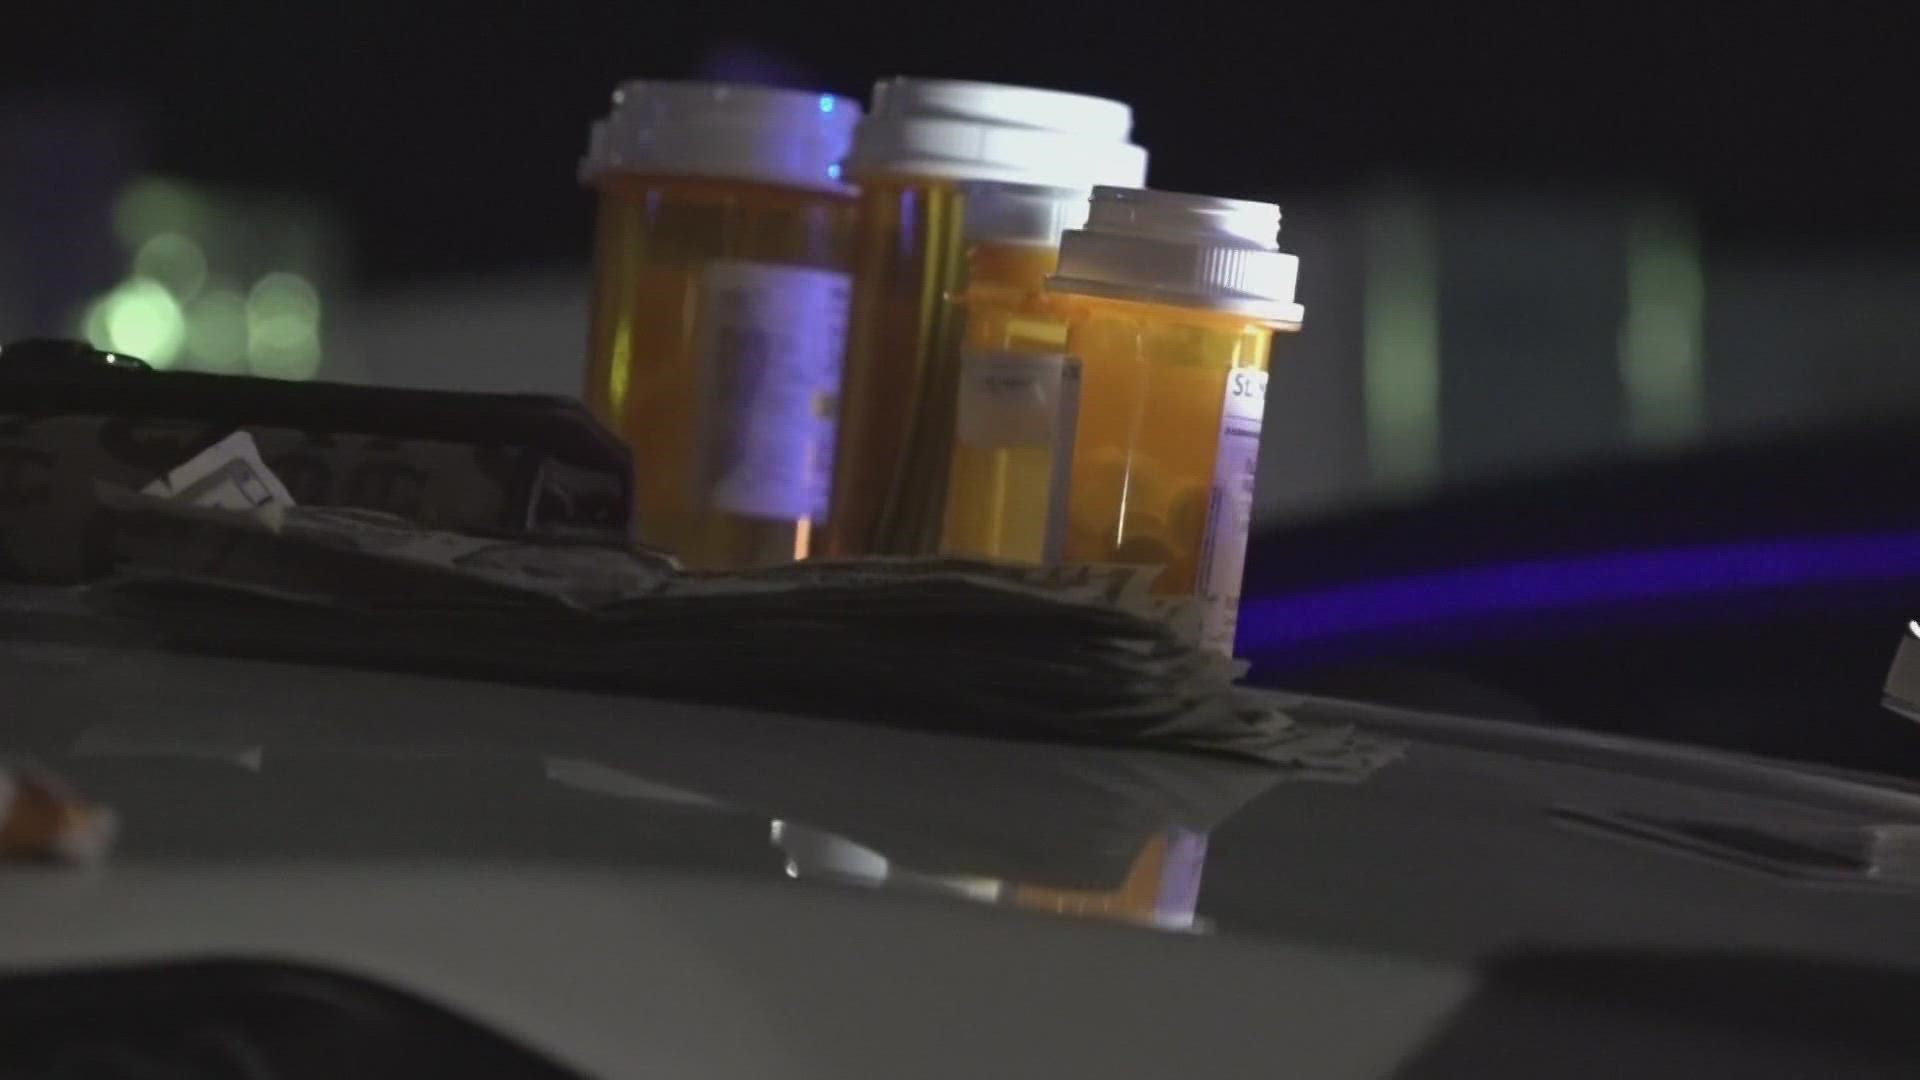 The Monroe County Sheriff's Office said they arrested around 15% more people for drug crimes compared to last year. KCSO said they have seen a similar trends.